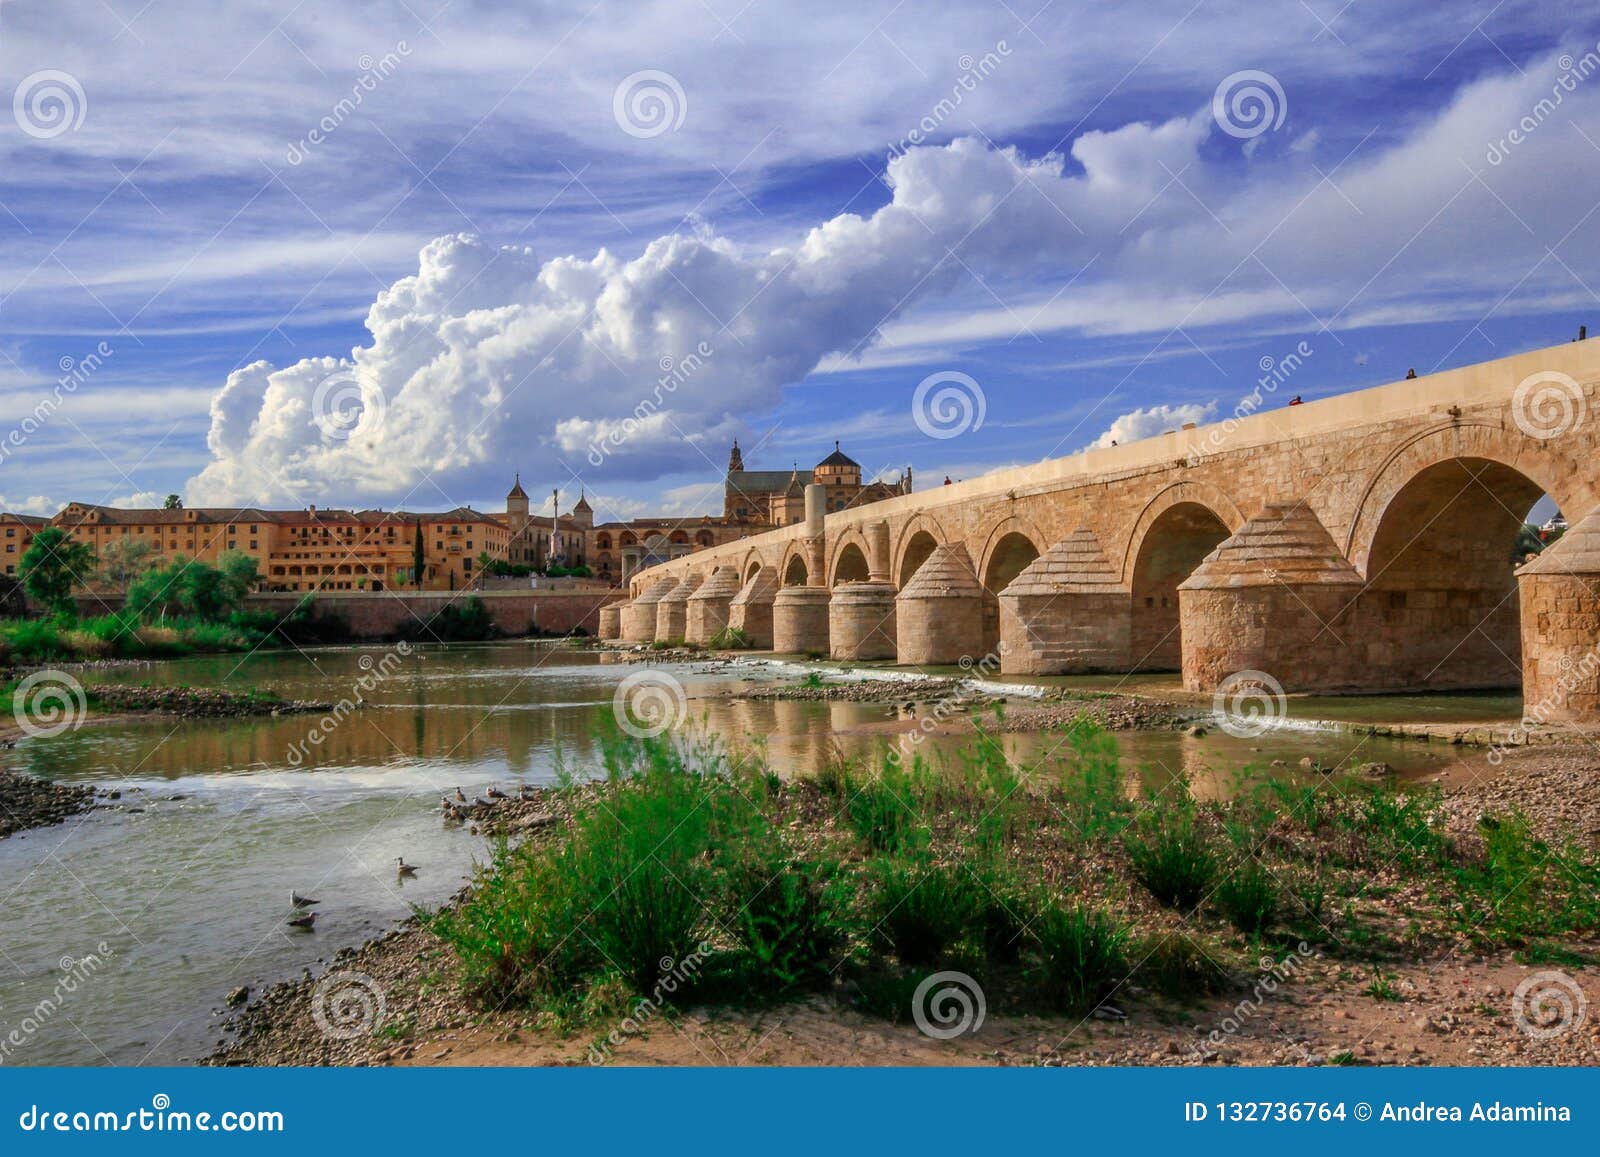 view of cordoba. moore, cityscape. spain andalucia